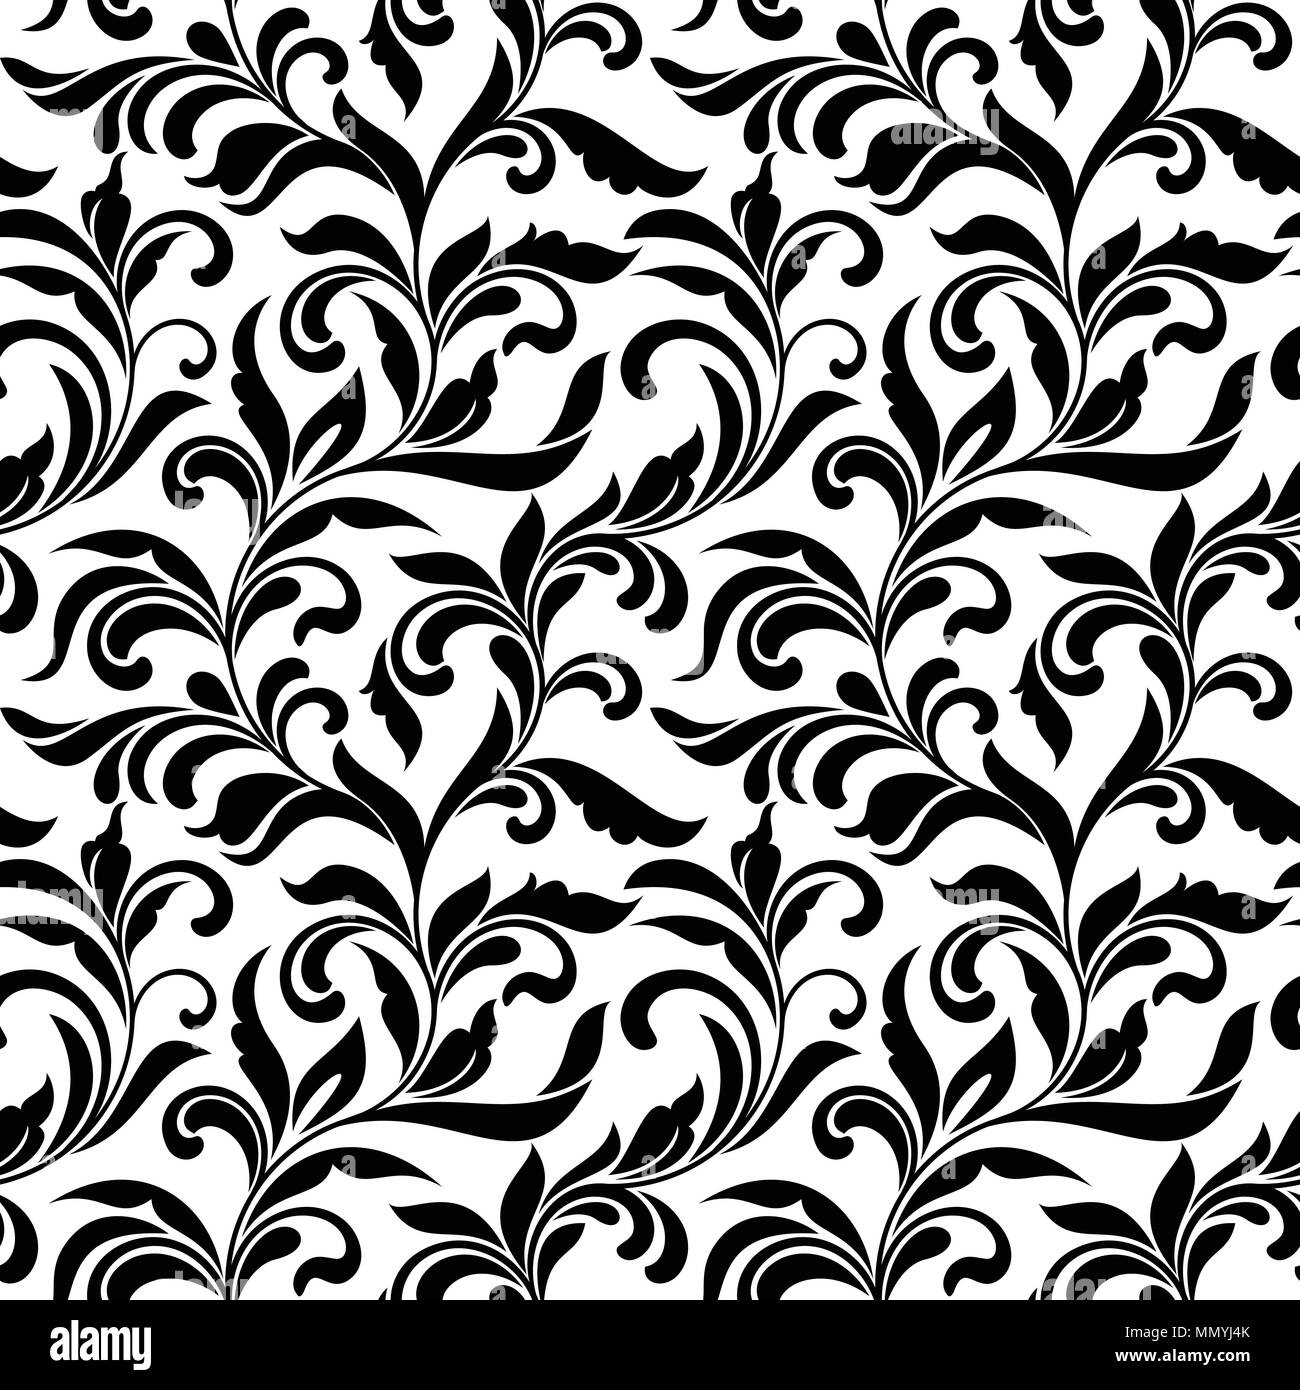 https://c8.alamy.com/comp/MMYJ4K/elegant-seamless-pattern-tracery-of-swirls-and-decorative-leaves-isolated-on-a-white-background-vintage-style-it-can-be-used-for-printing-on-fabric-MMYJ4K.jpg